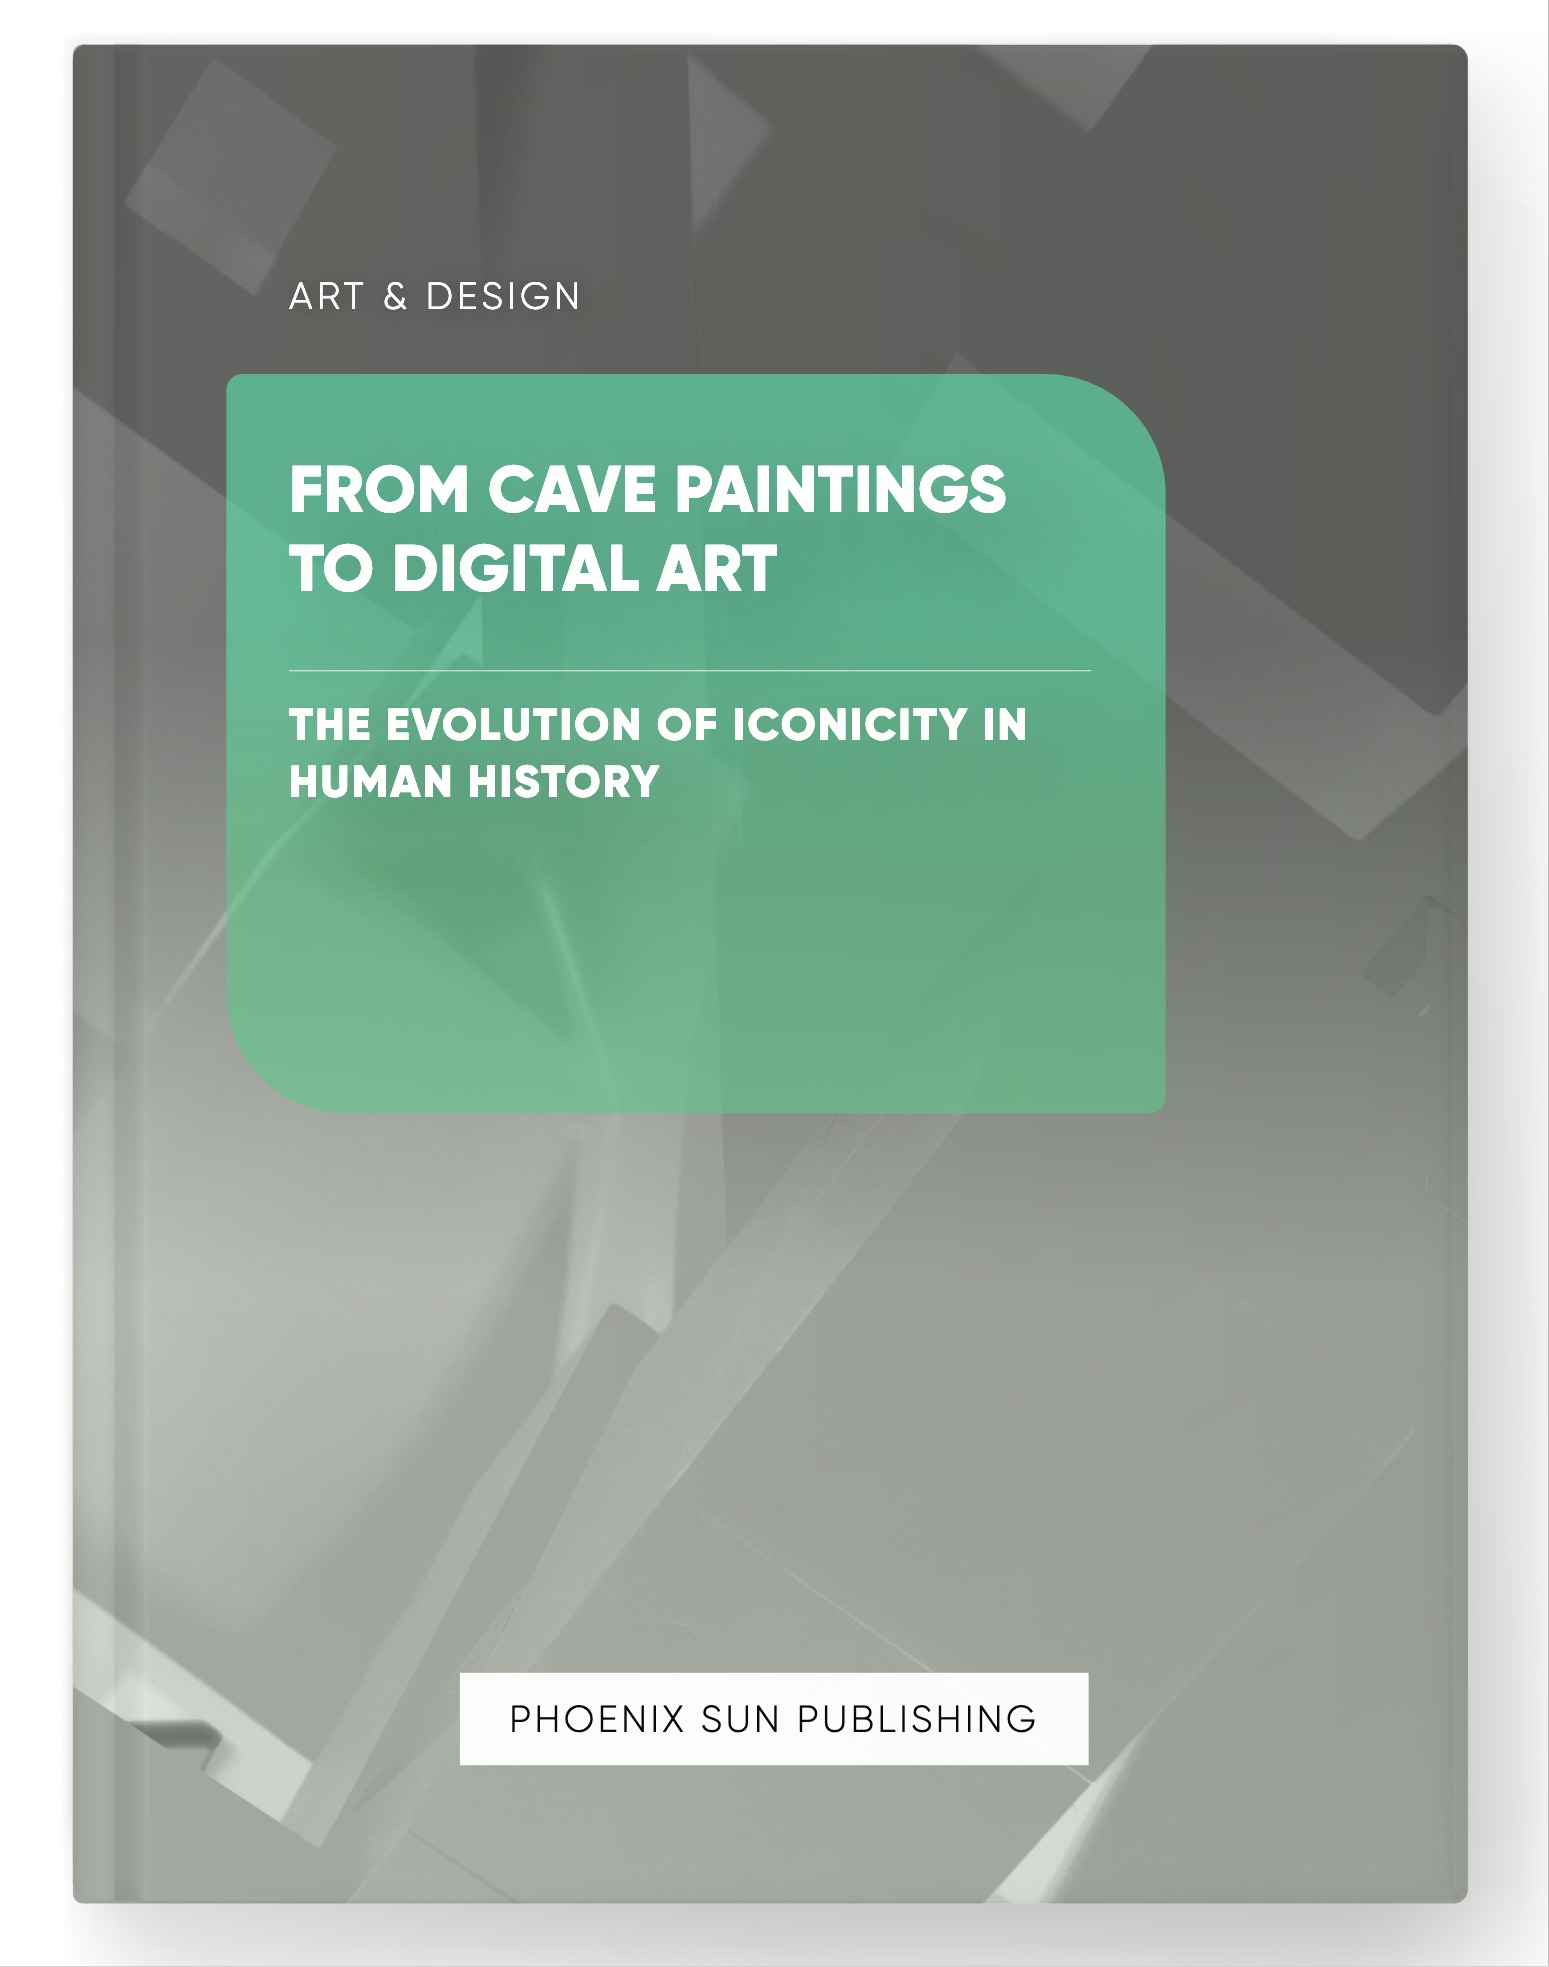 From Cave Paintings to Digital Art – The Evolution of Iconicity in Human History